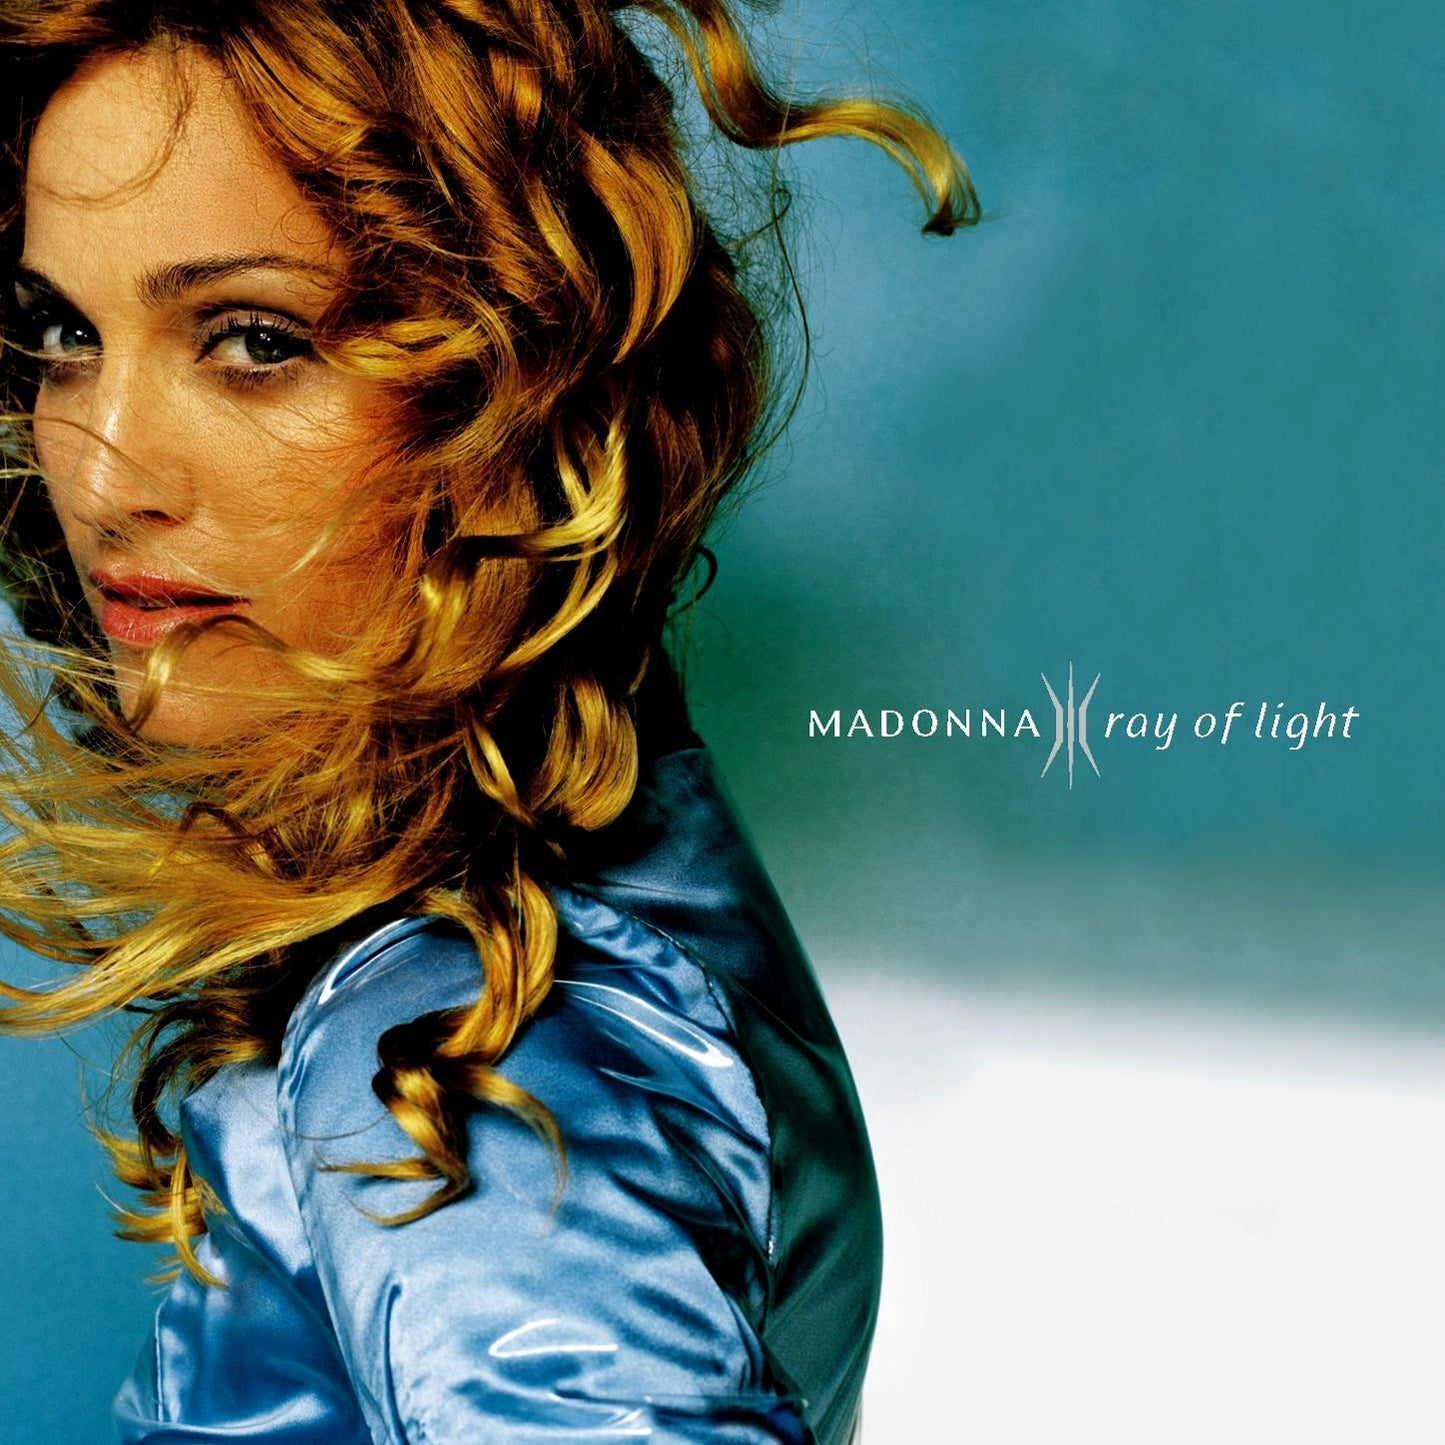 Madonna - Ray Of Light | Buy the Vinyl now from Flying Nun